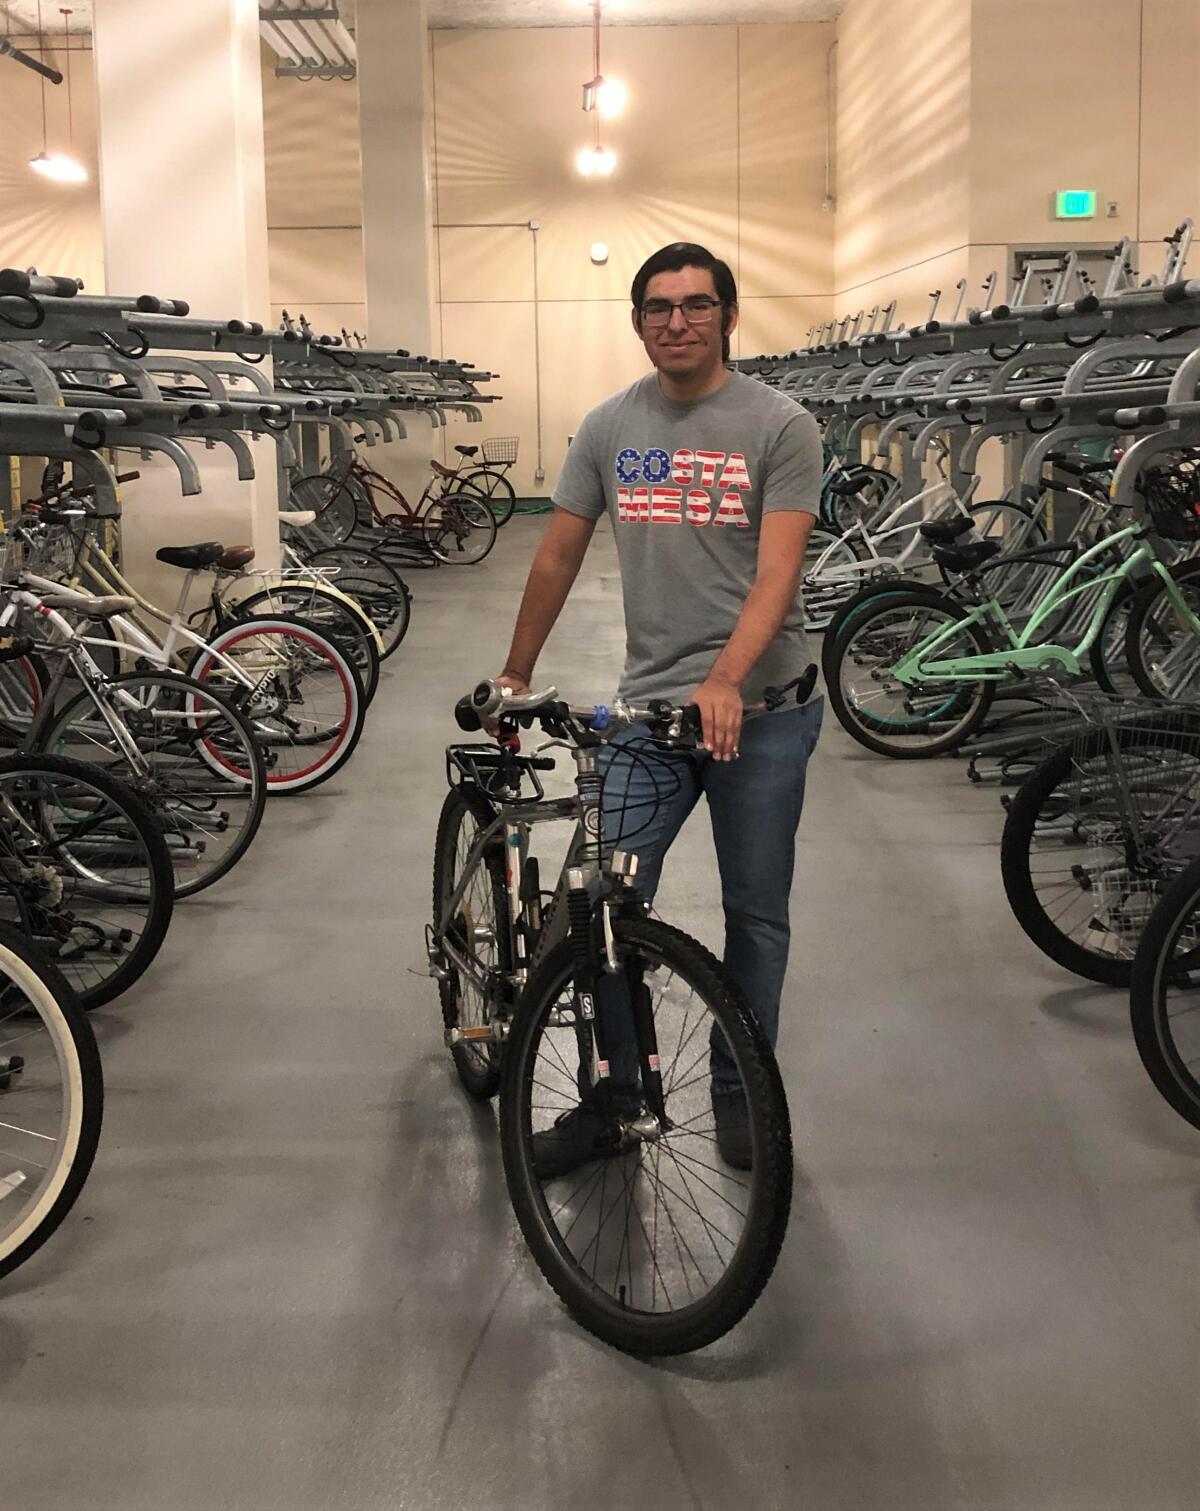 Costa Mesa resident David Martinez helped change a state law prohibiting the enforcement of outdated bike licensing rules.